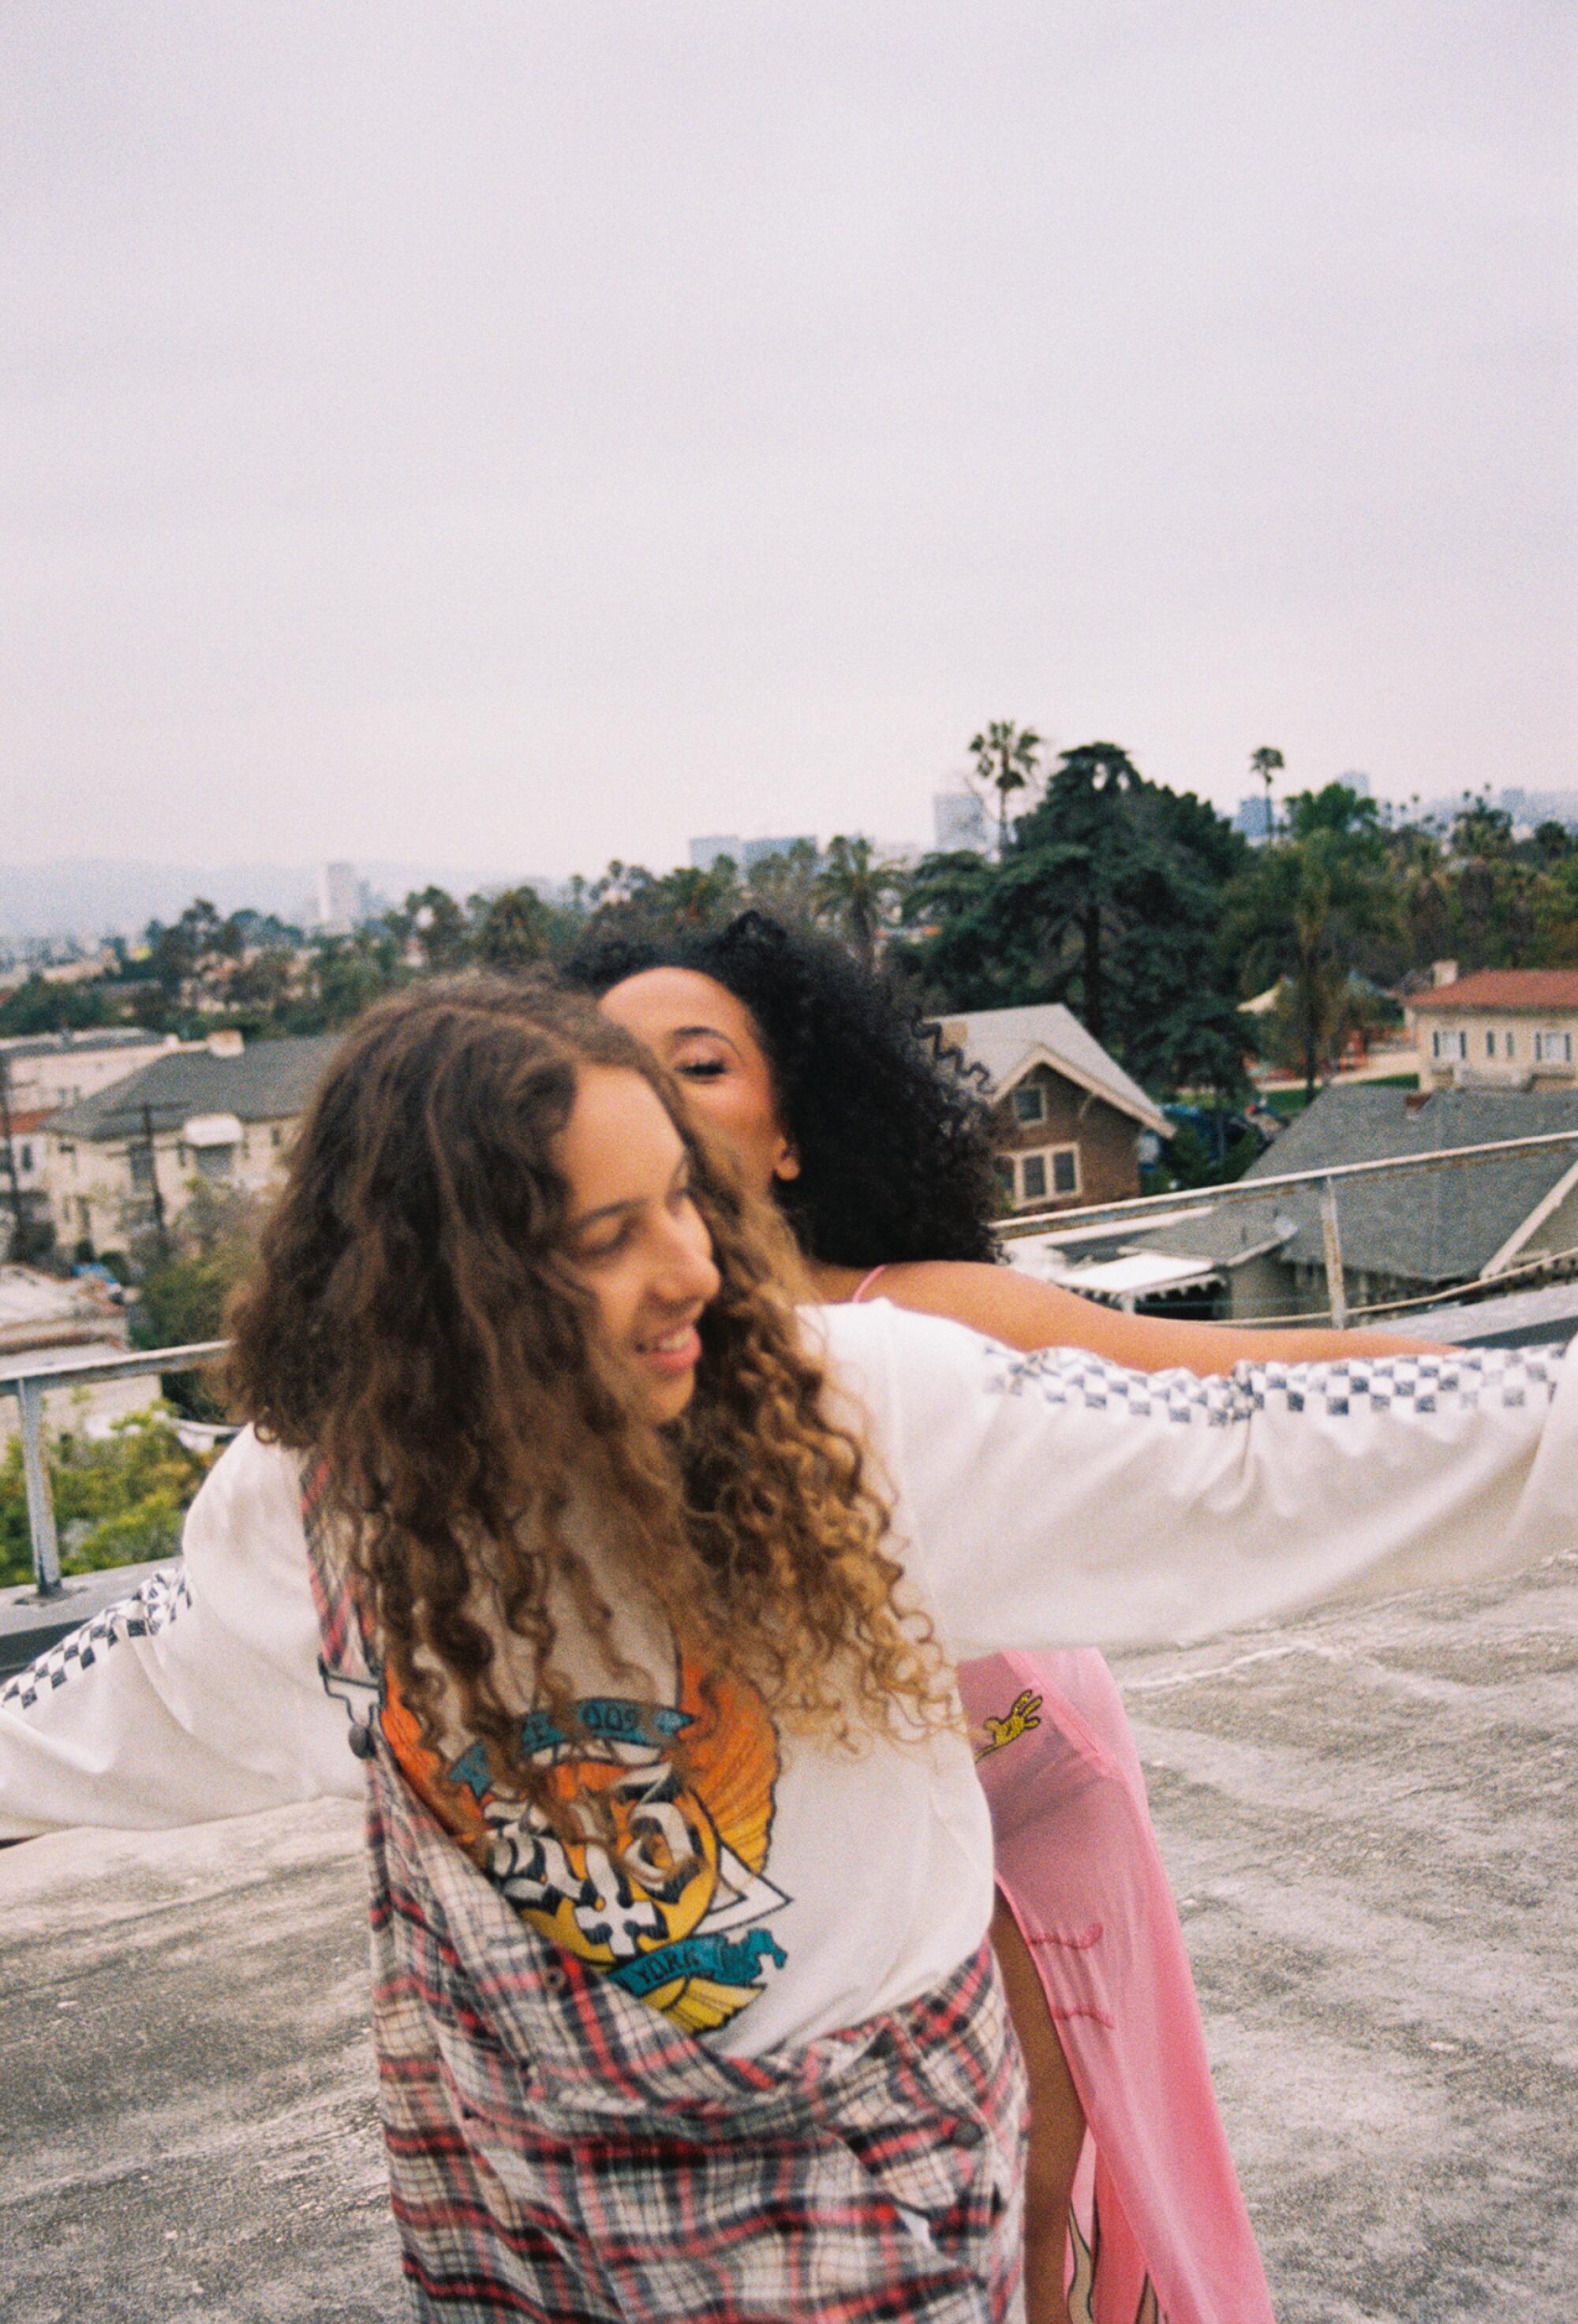 Two people embrace on a rooftop.